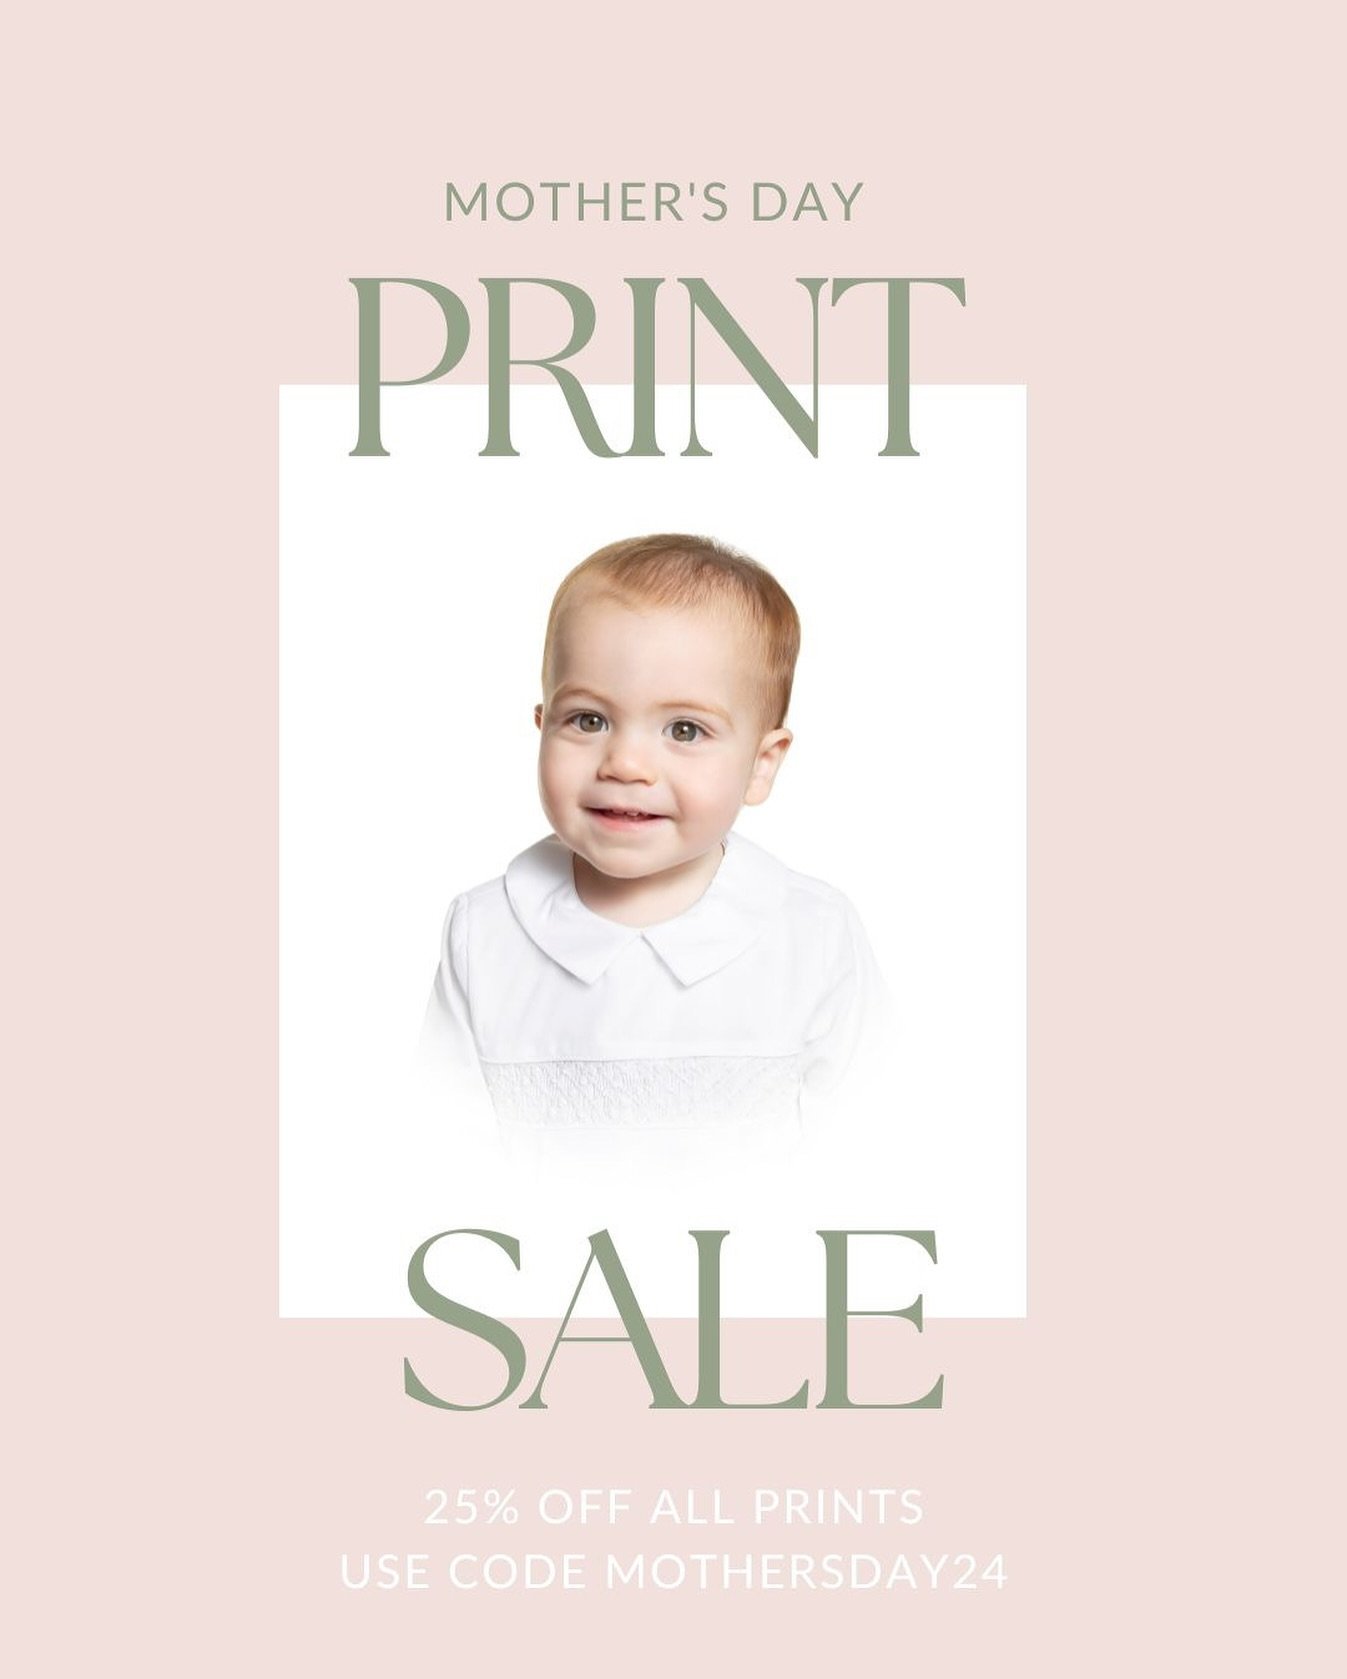 MOMS! It&rsquo;s your weekend so we&rsquo;re celebrating with a flash sale! Take 25% off all print orders now through Monday. We seriously couldn&rsquo;t do it without all of you amazing mamas and we&rsquo;re so thankful for all of you! 🥰❤️